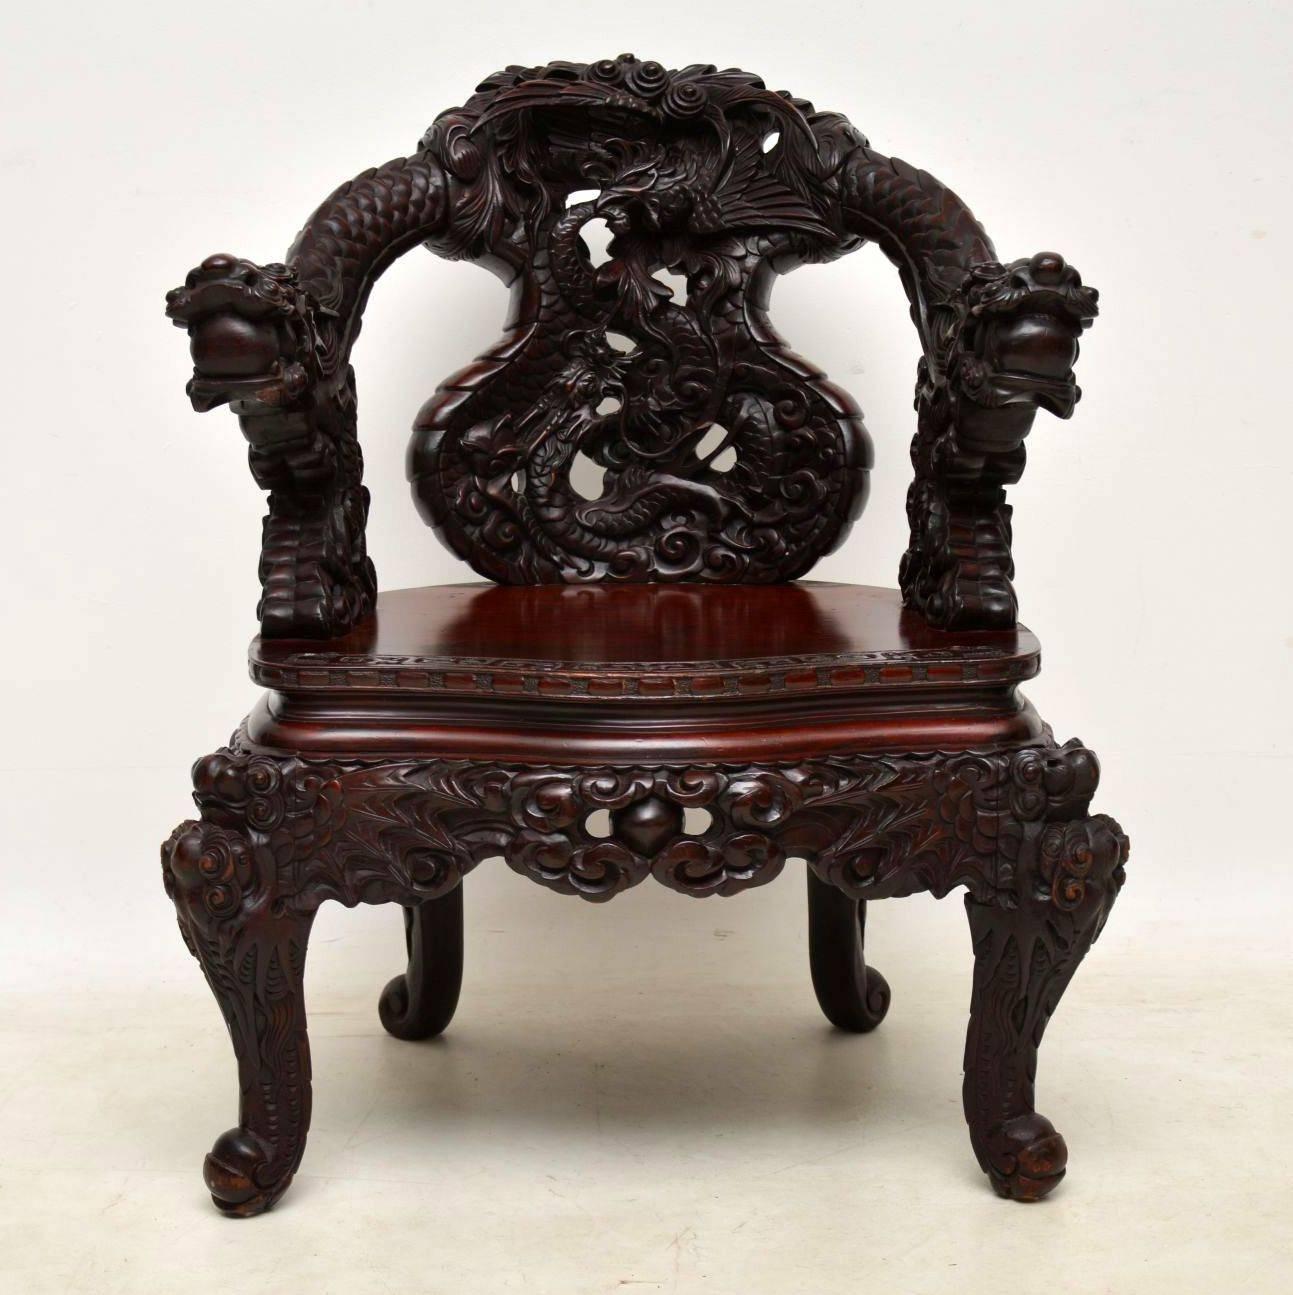 This spectacular looking rare antique armchair I believe is Chinese and it has amazing deep carvings all over. It dates to circa 1890-1910 period and is in excellent condition having just been polished. I can't possibly describe all of the details,